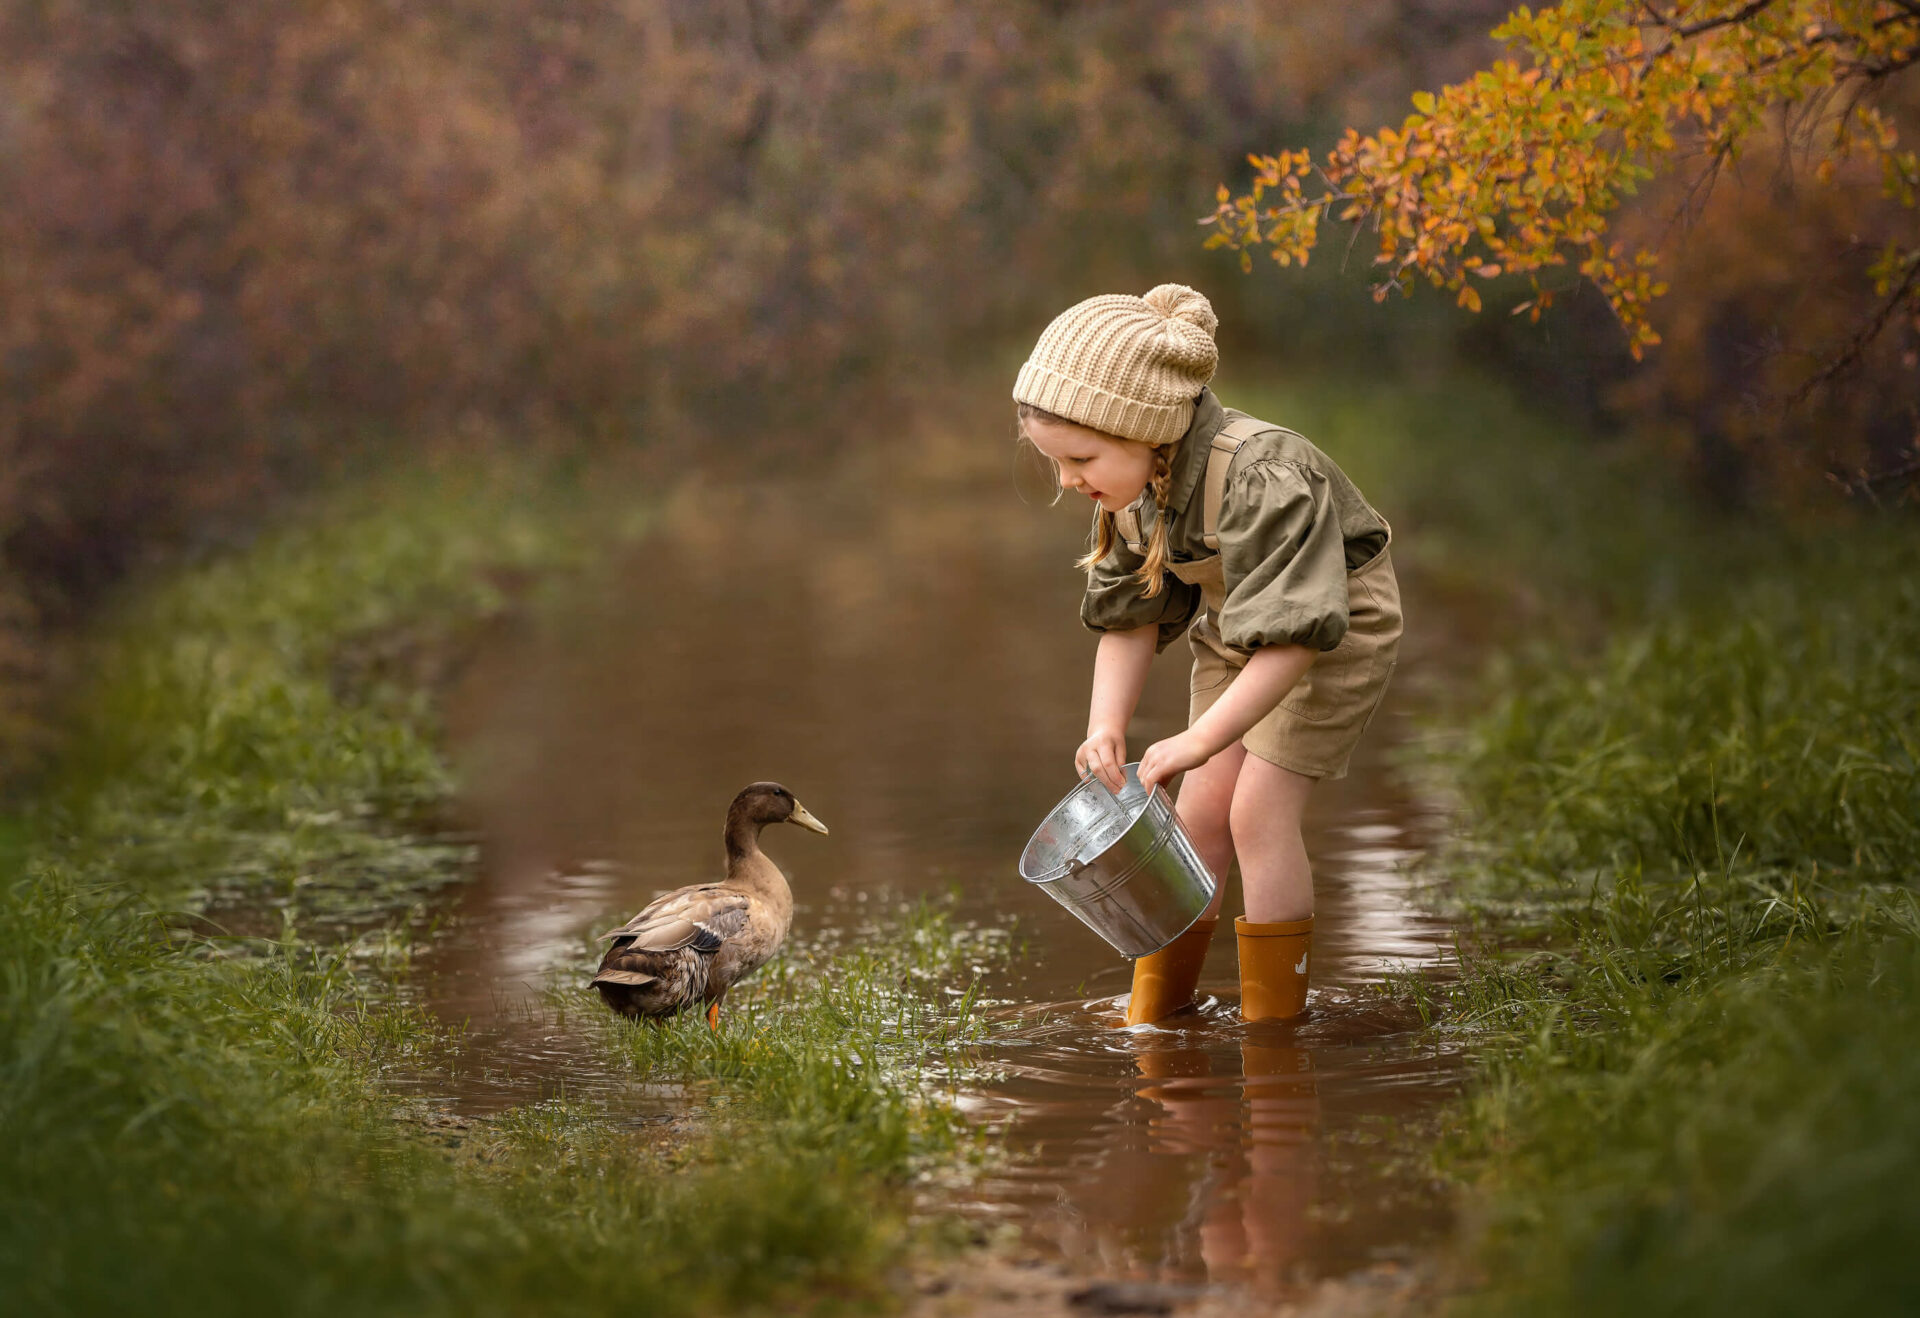 Perth girl with her pet duck during outdoor photoshoot